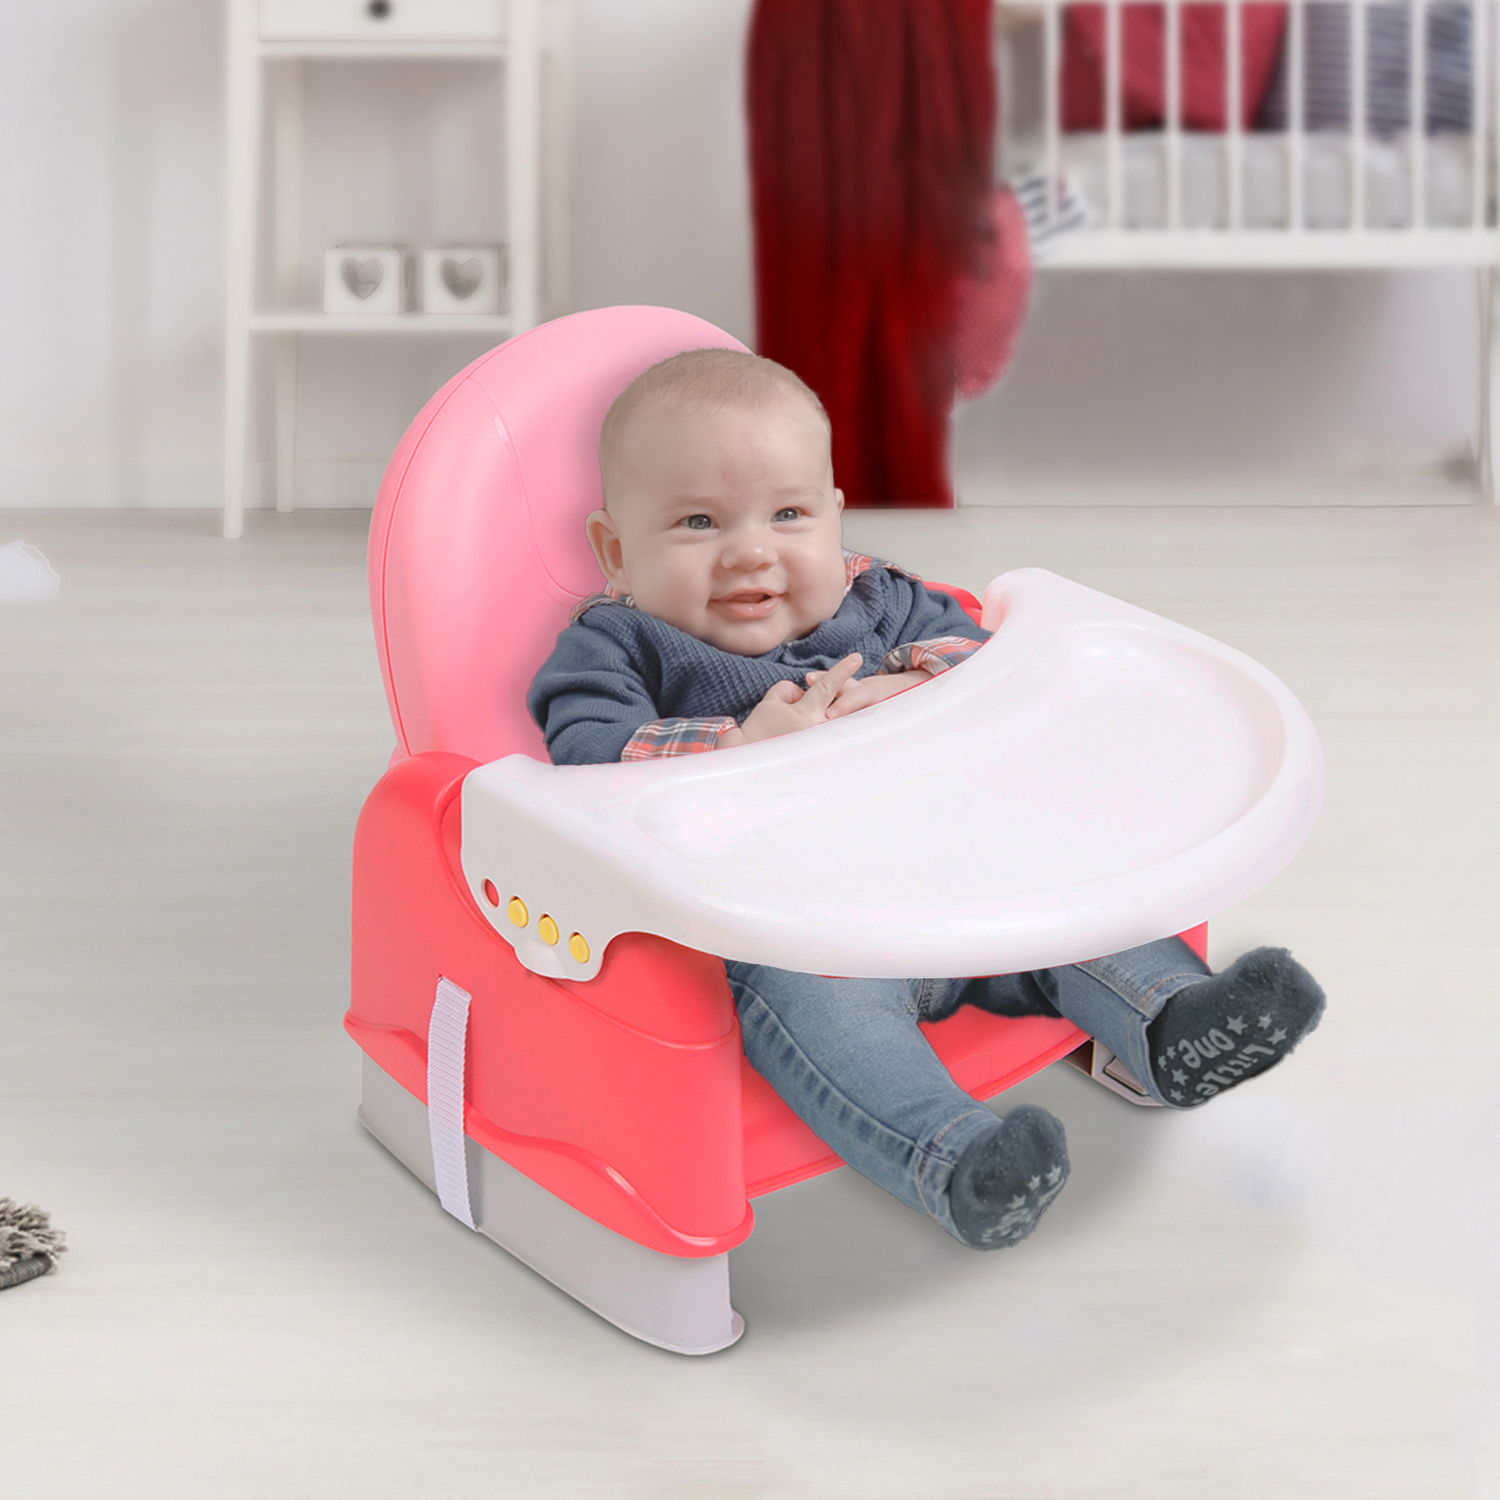 Multifunction Baby Chair Feeding Safety Baby Chair Adjustable